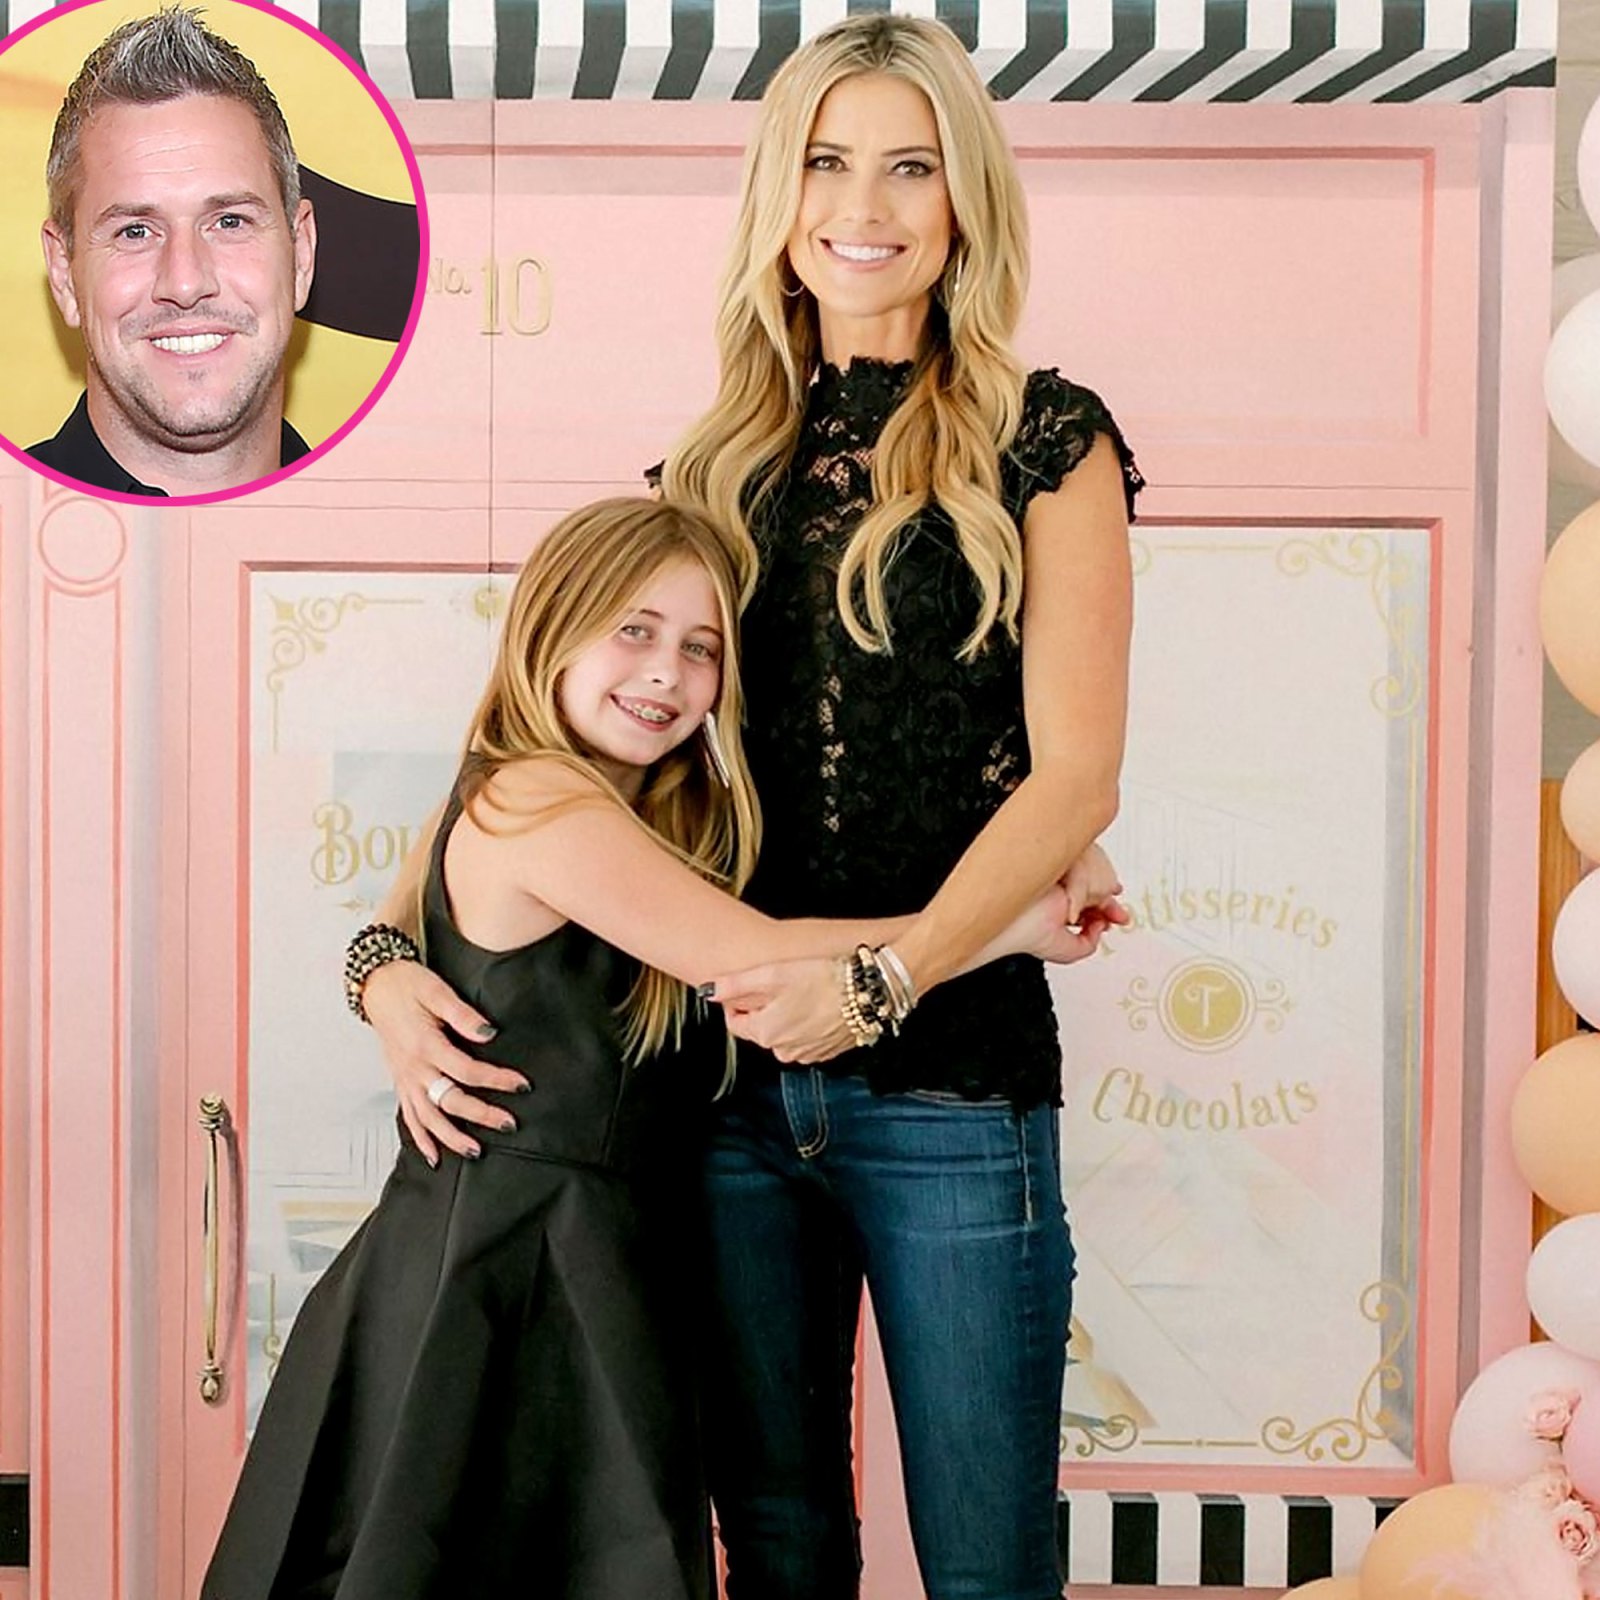 Christina Ant Anstead Celebrate Her Daughter Taylor 10th Birthday Amid Split